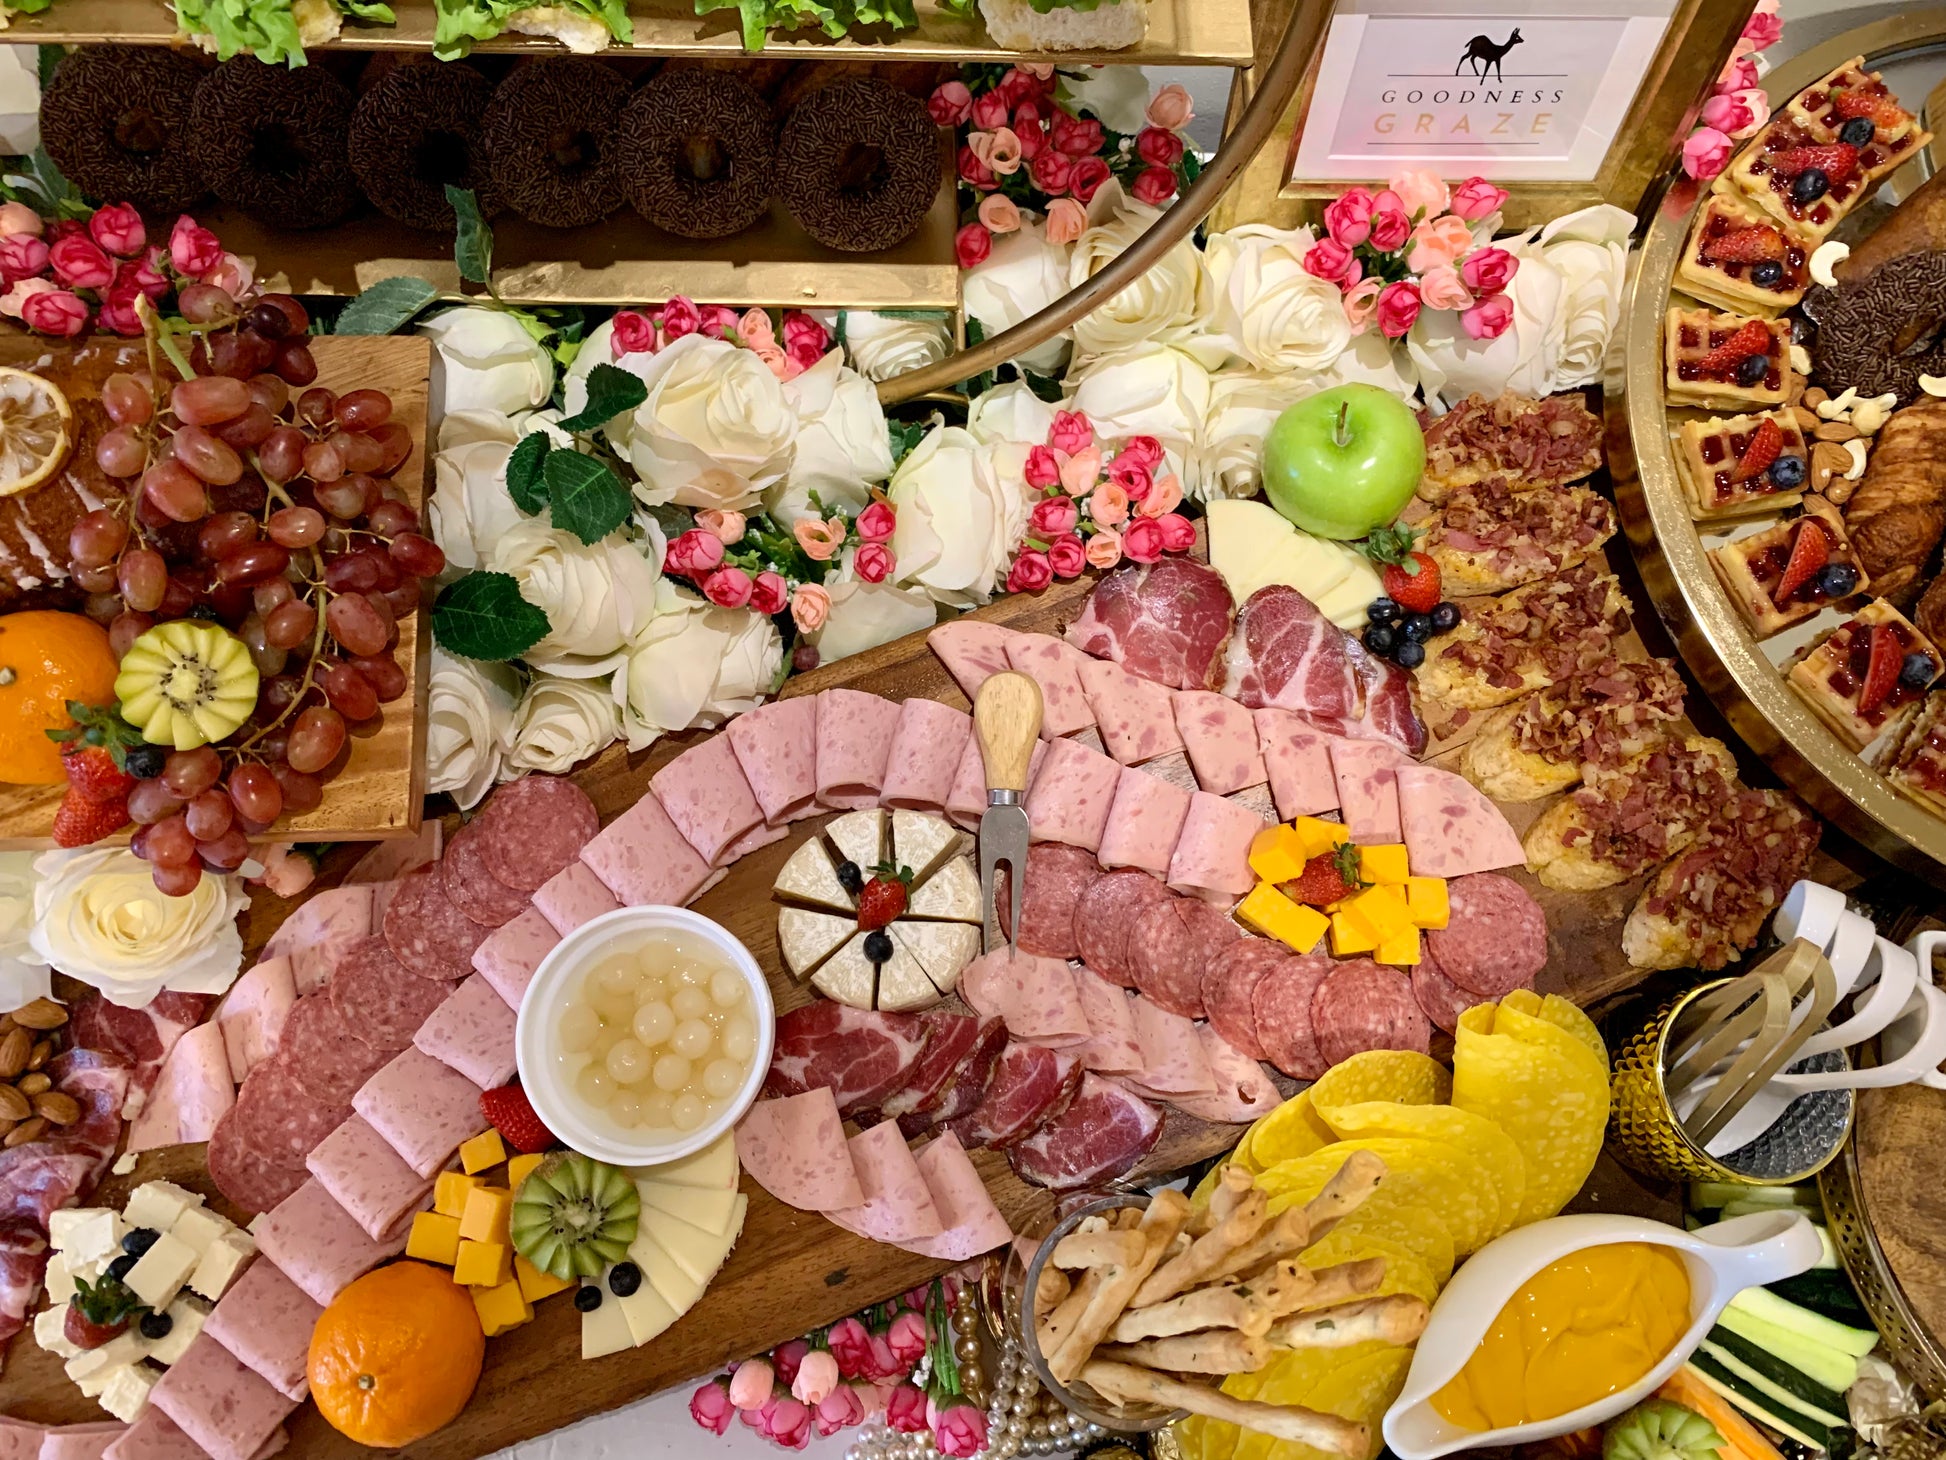 Grazing table with cheeses, cold cuts, fruits, nuts, and other treats